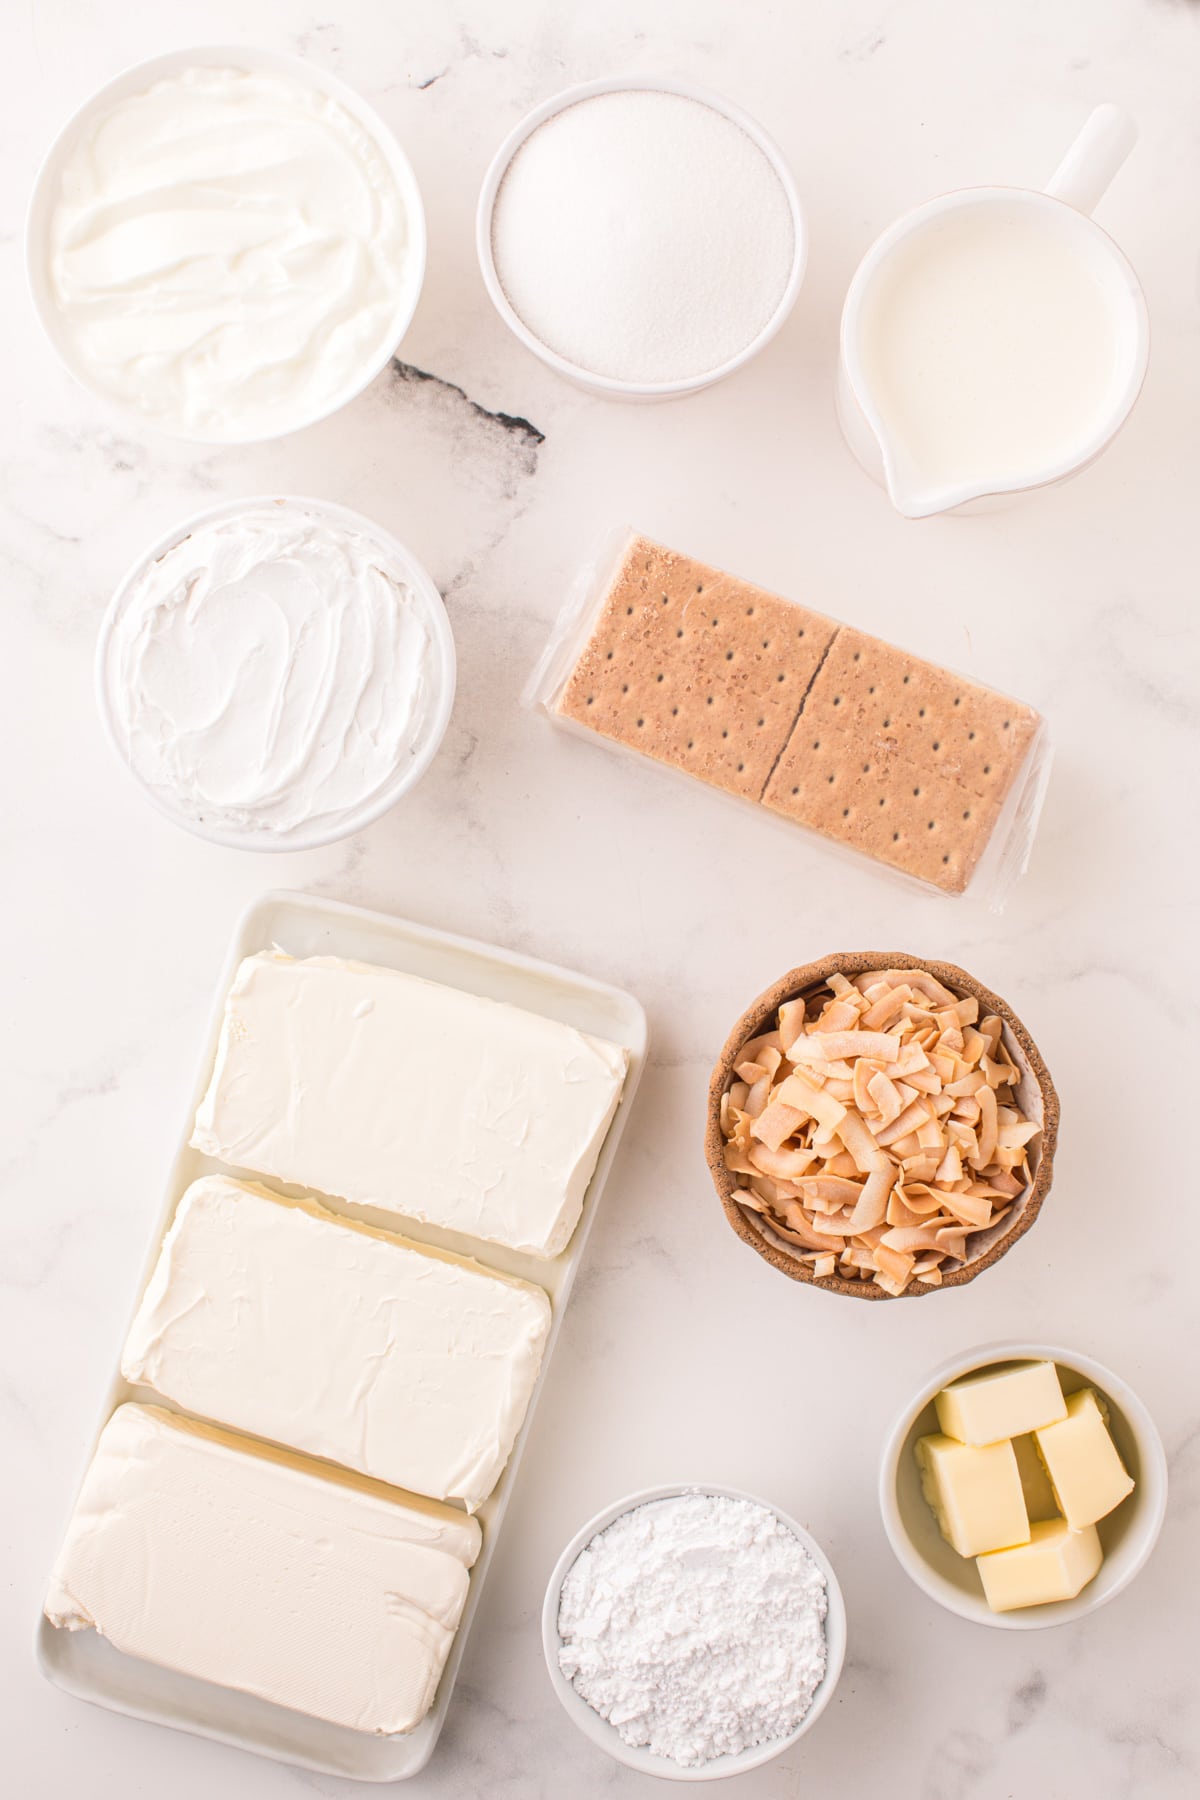 Ingredients needed to make a No Bake Coconut Cheesecake.